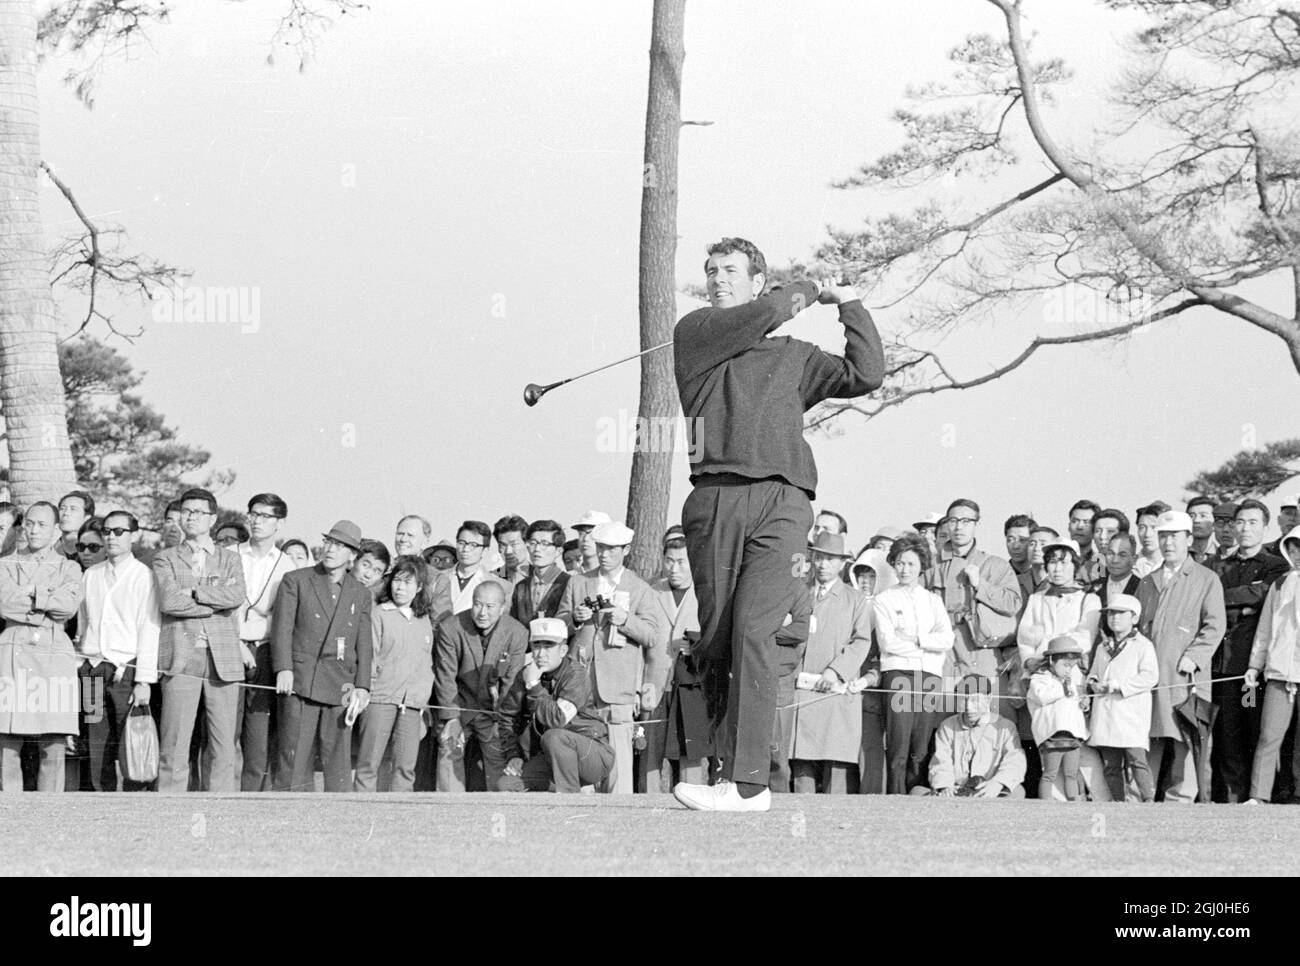 Tokyo : Hugh Boyle. the Irish Professional, tees off at the start of the final in the International Open Golf Tournament at the Yomiuri Country Club here, April 10th Boyle won the tournament when his 286 put him two shots ahead of Australia's E. Ball. 13 April 1966 Stock Photo